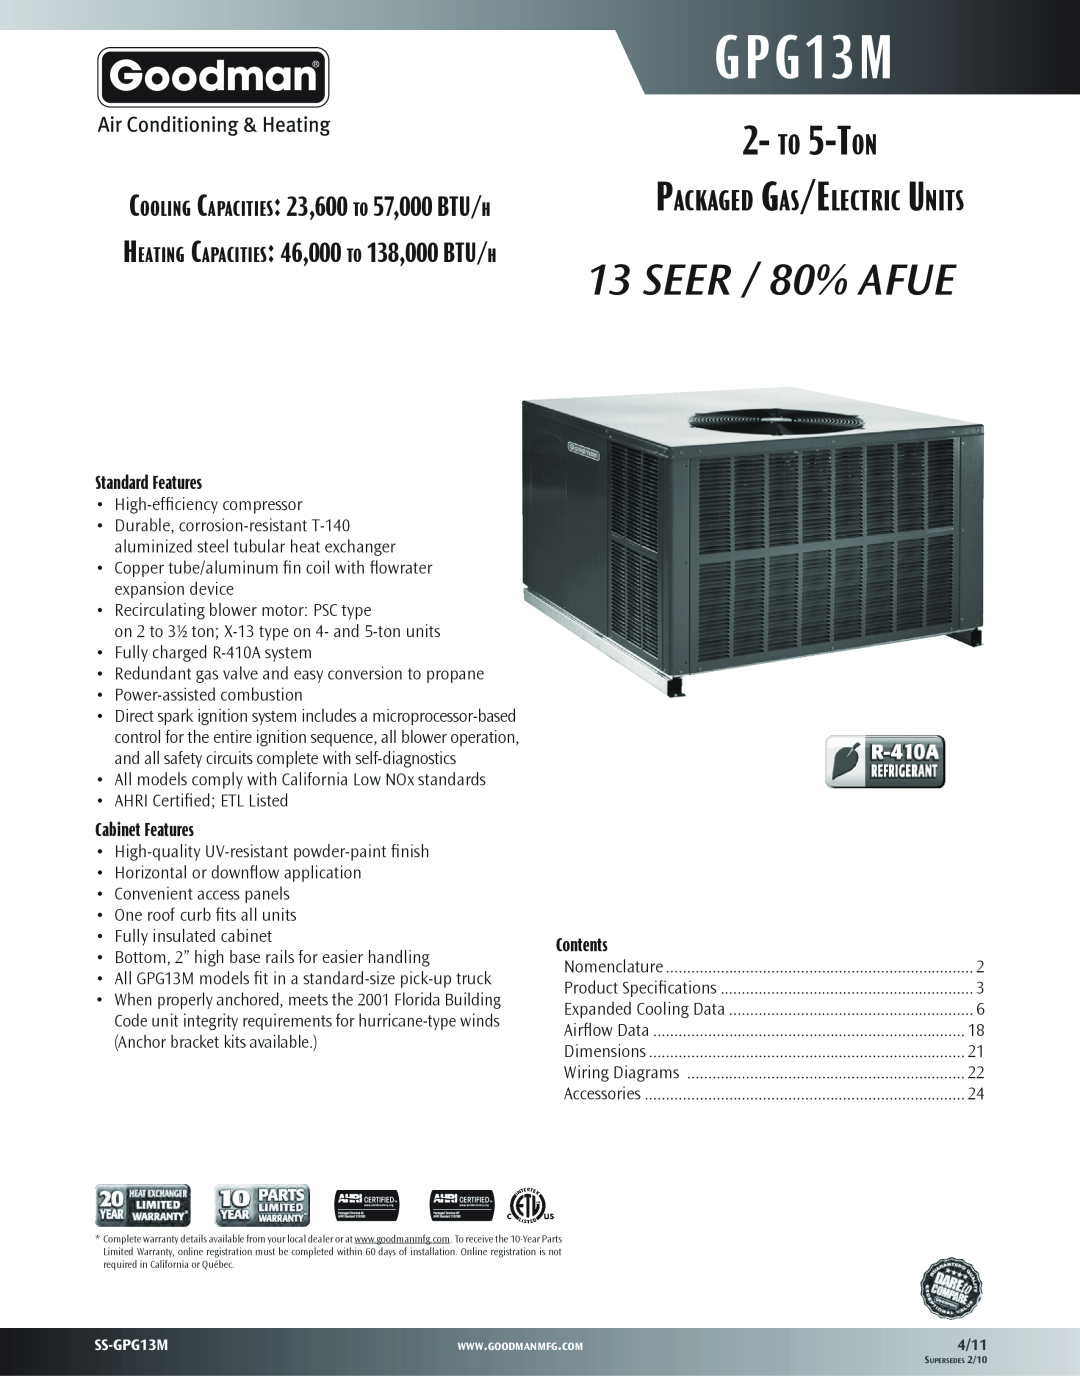 Goodman Mfg GPG13M warranty SEER / 80% AFUE, to 5-Ton, Packaged Gas/Electric Units, Standard Features, Cabinet Features 